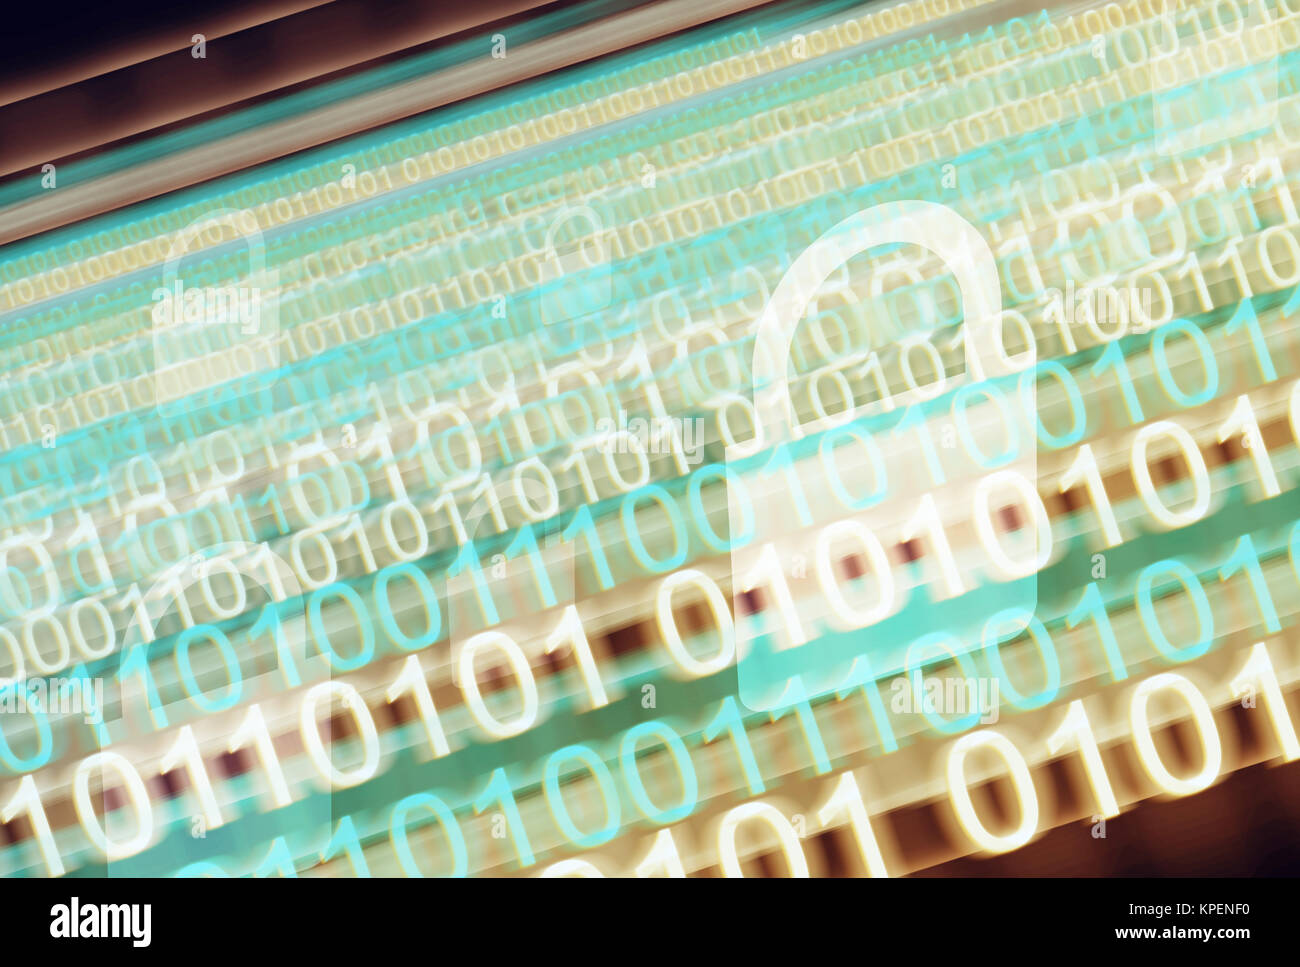 Abstract Digital Security Technologies Background Stock Photo